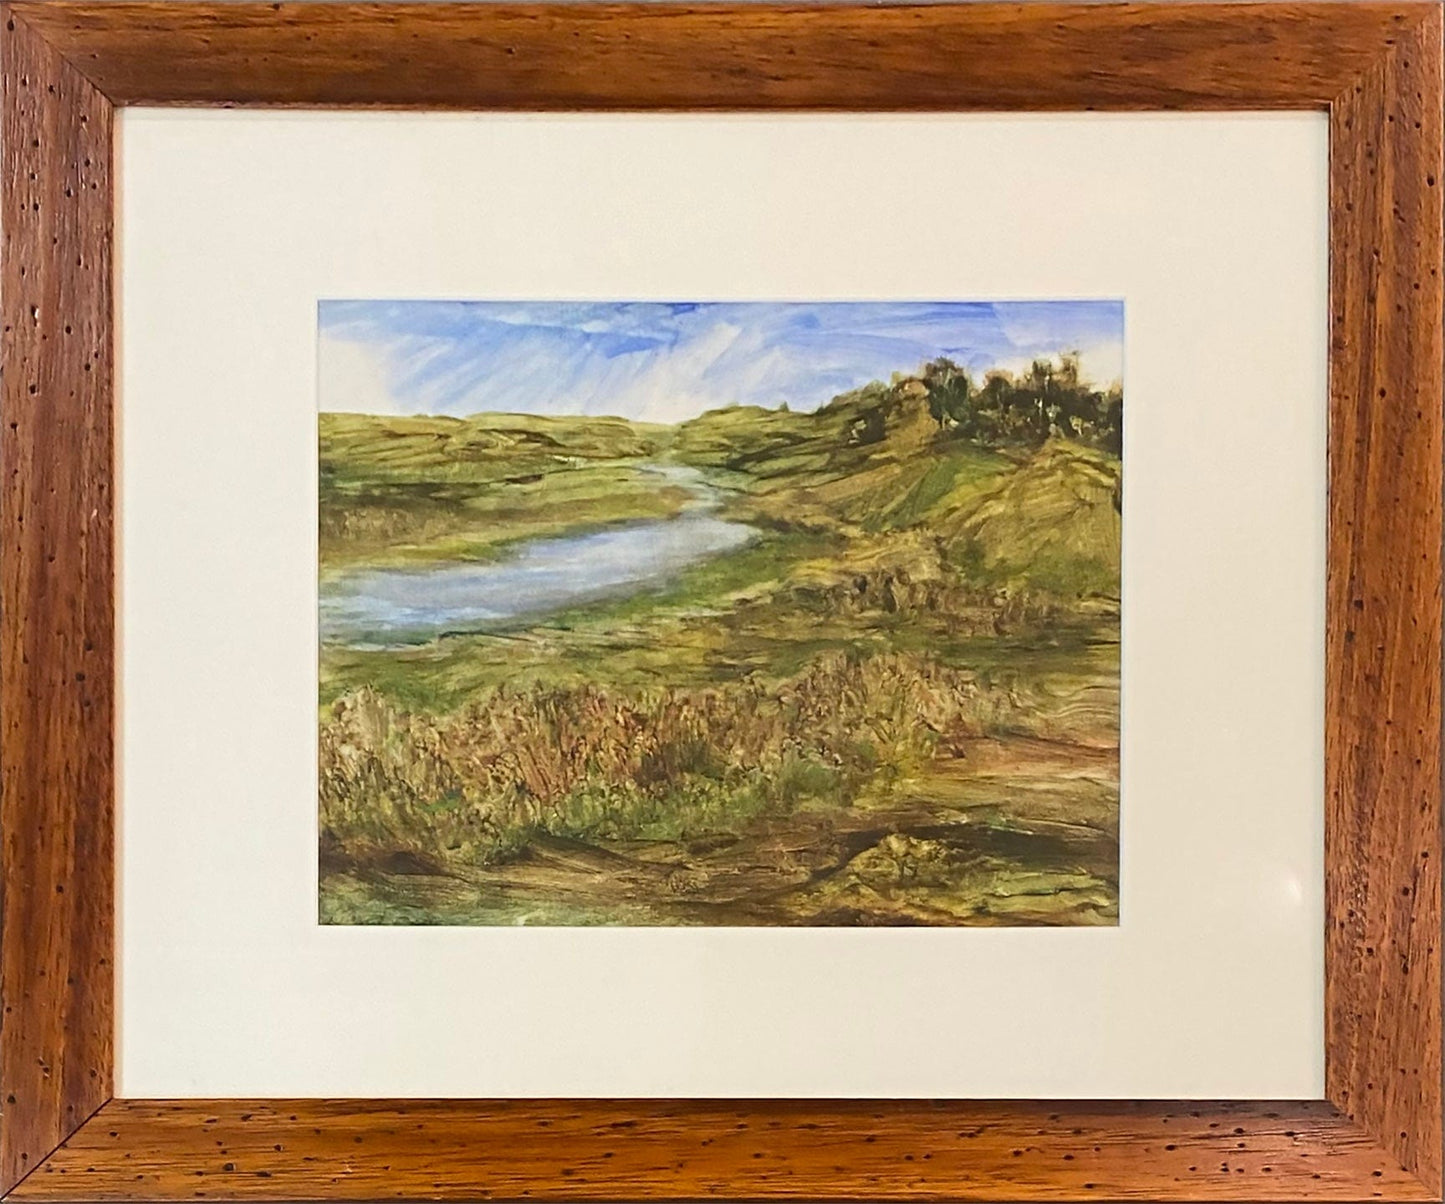 Colleen Meneer painting Landscape With River, framed Art Works Gallery